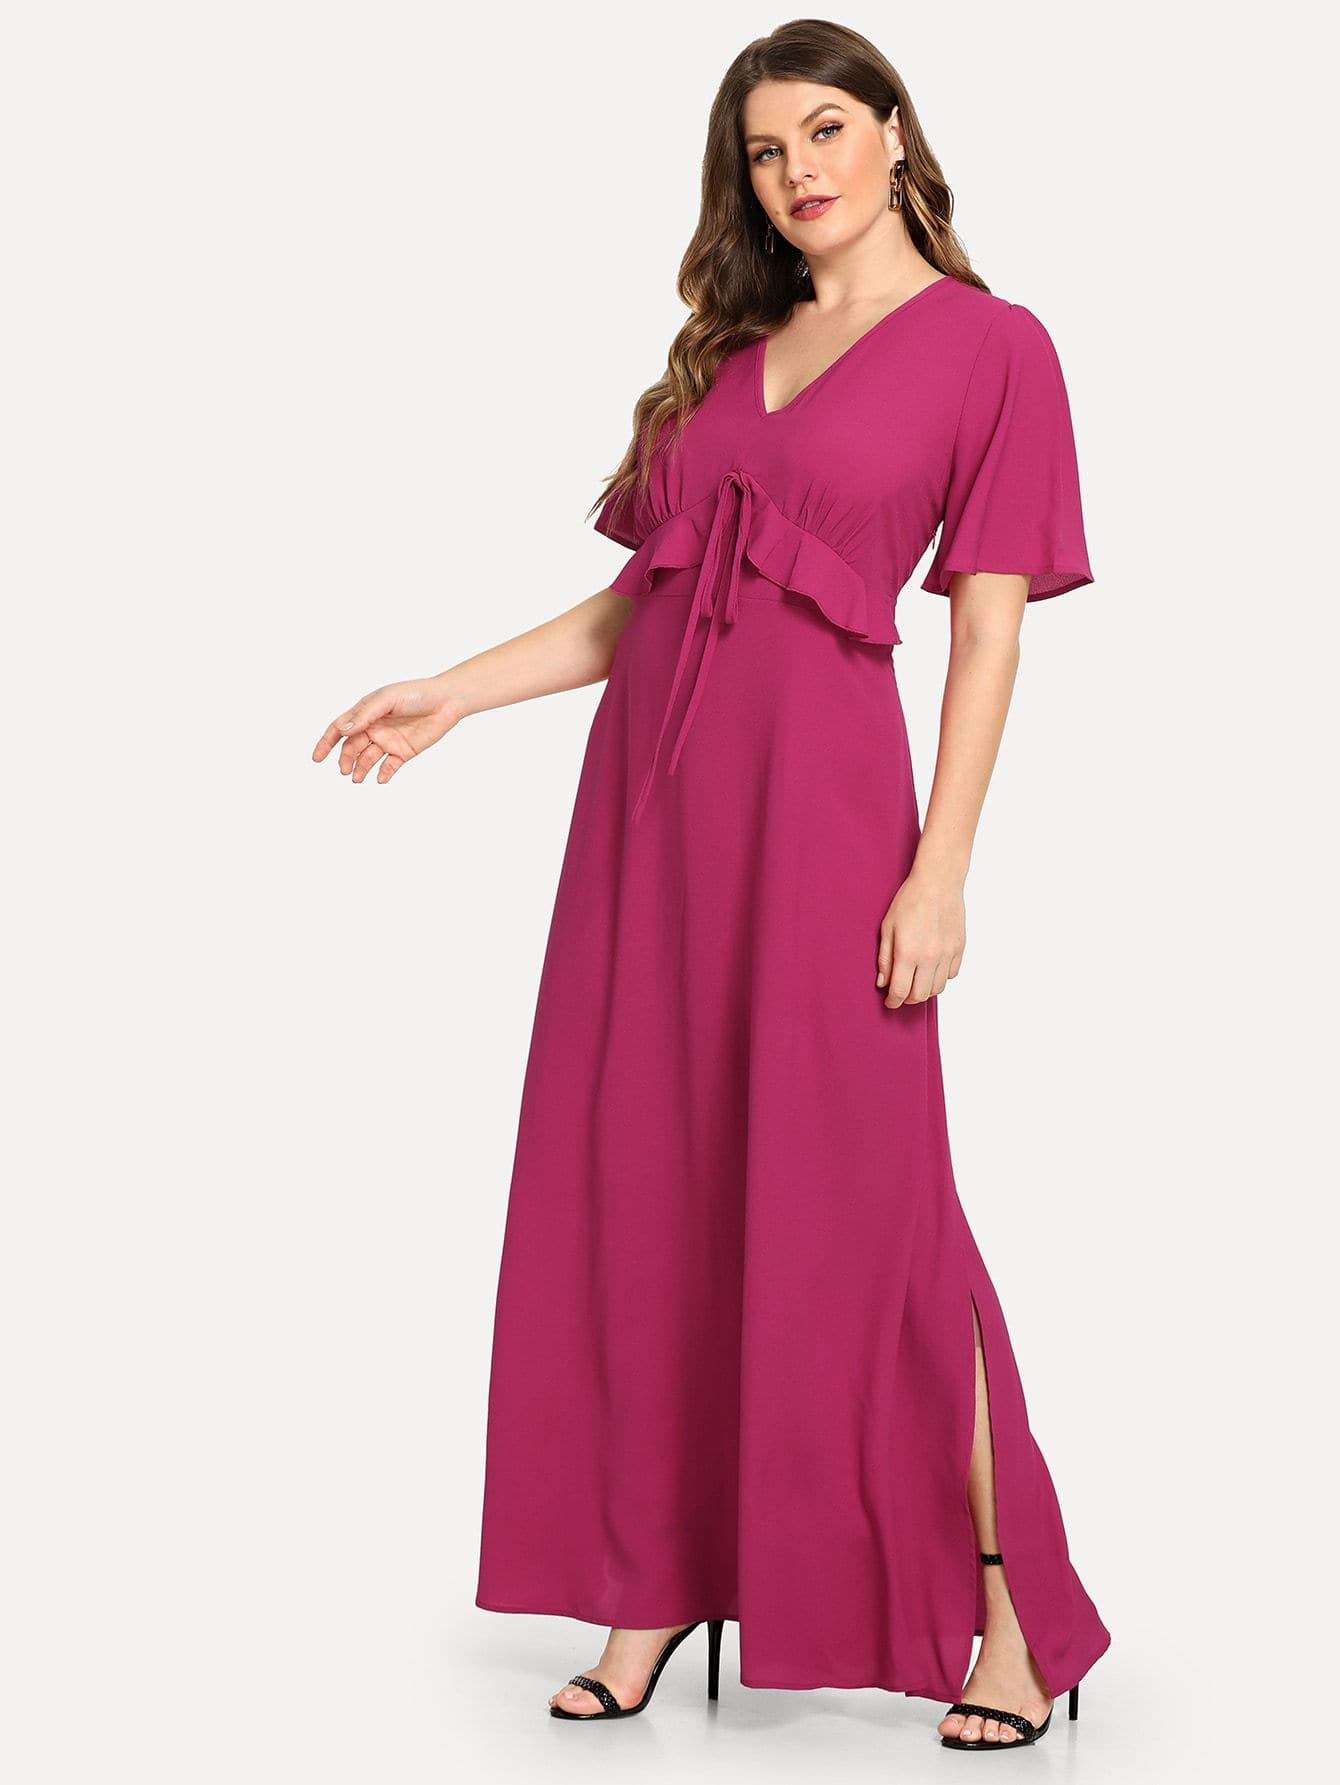 Hot Pink Polyester V Neck Plus Knot Detail Ruffle Solid Dress